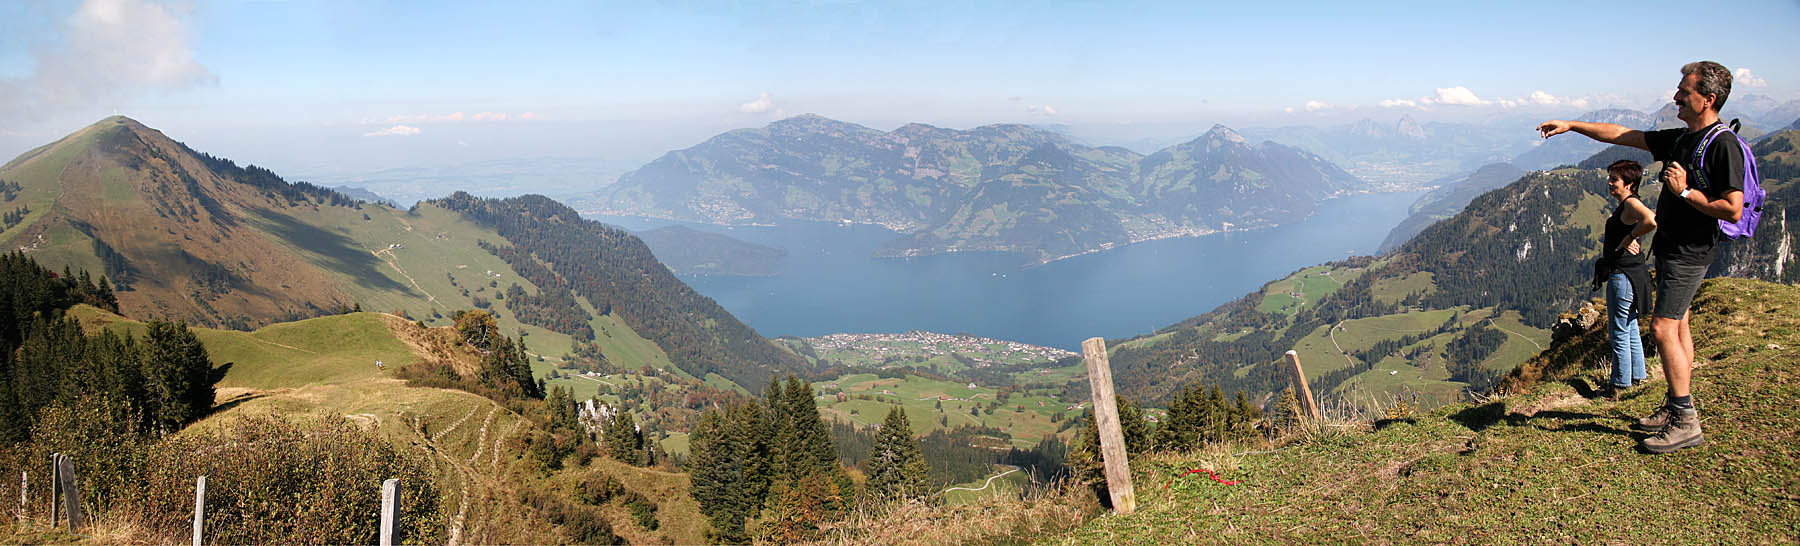 Look, .. there is the lake Lucerne!